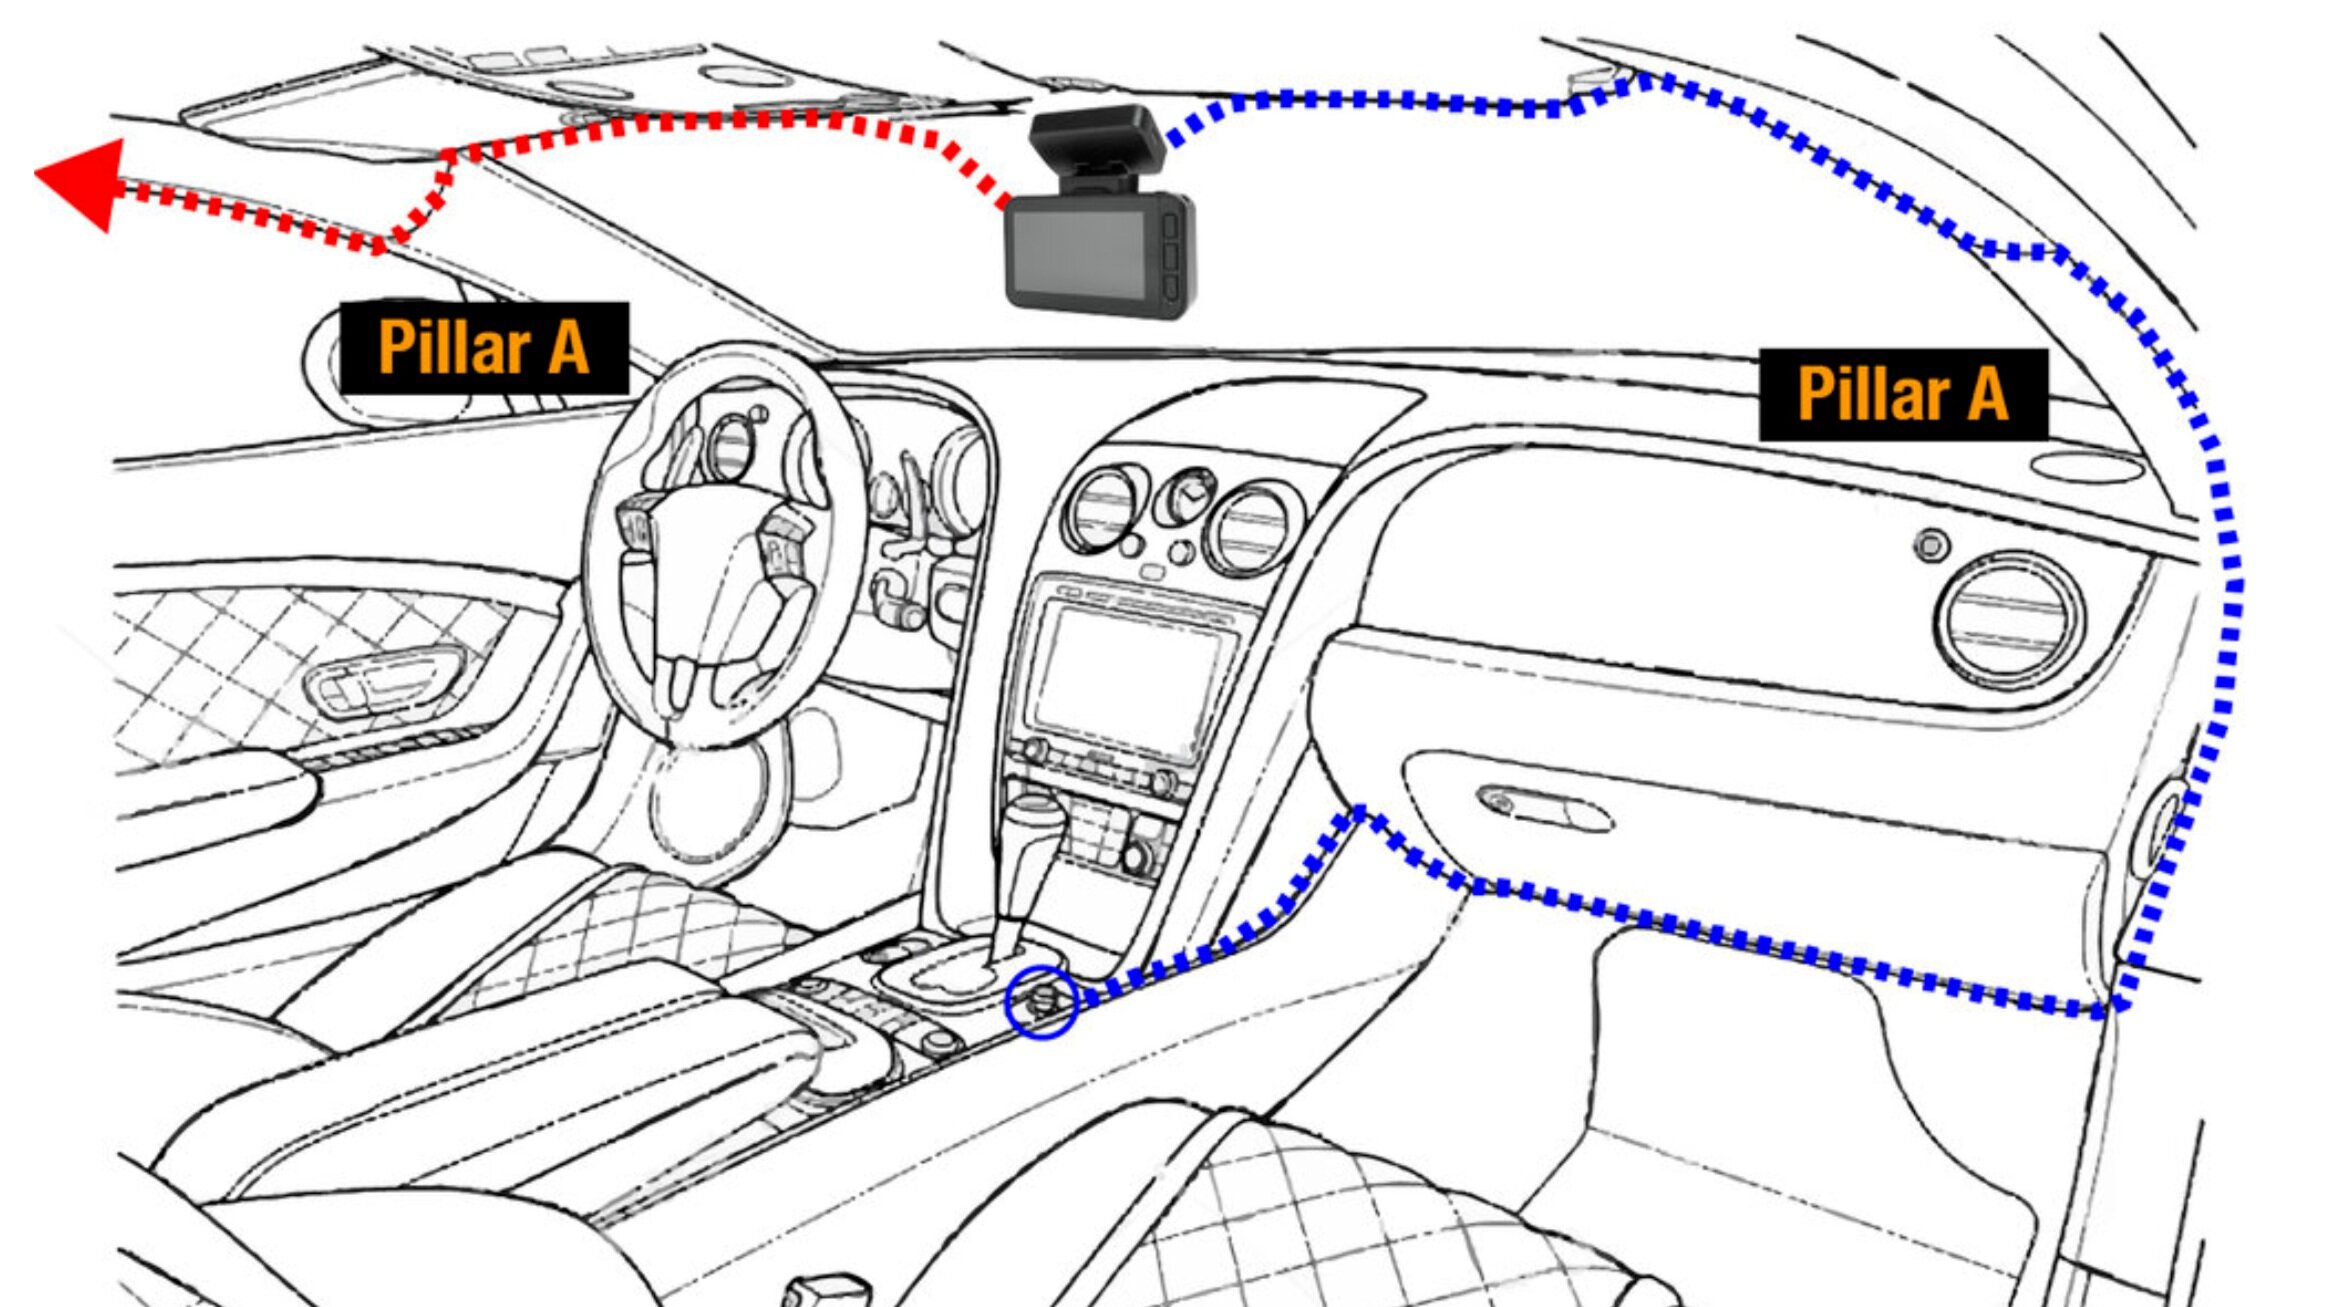 Complete Guide to Installing a Dashcam in Your Car - Tips, Guides, &  Tutorials for Your Dash Cam